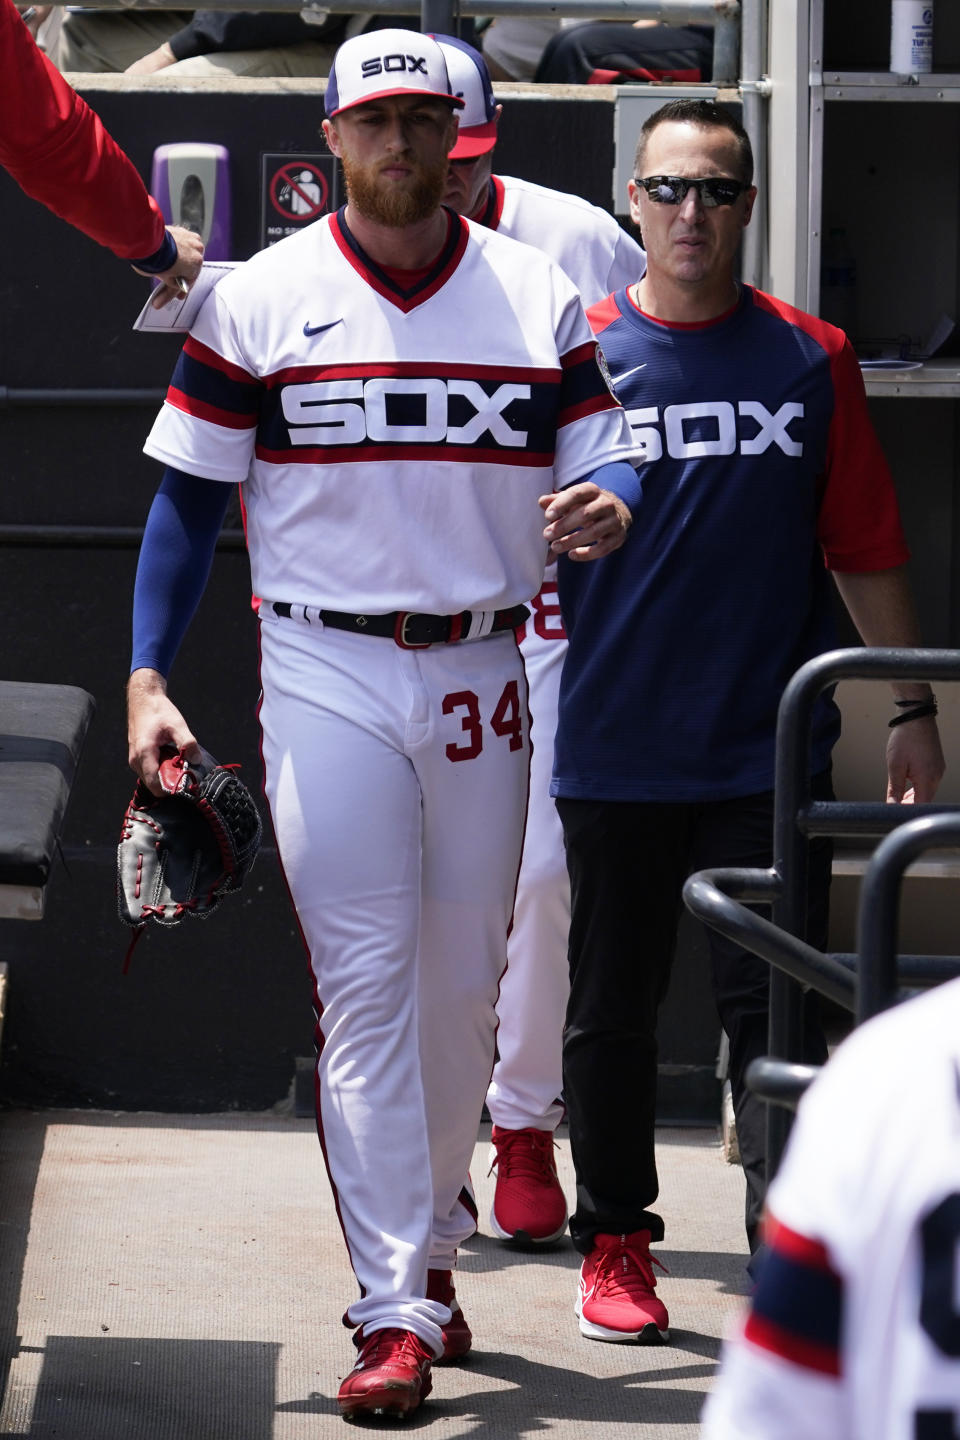 Chicago White Sox starting pitcher Michael Kopech, left, walks in the dugout with a team trainer after being injured during the first inning of a baseball game against the Texas Rangers in Chicago, Sunday, June 12, 2022. (AP Photo/Nam Y. Huh)